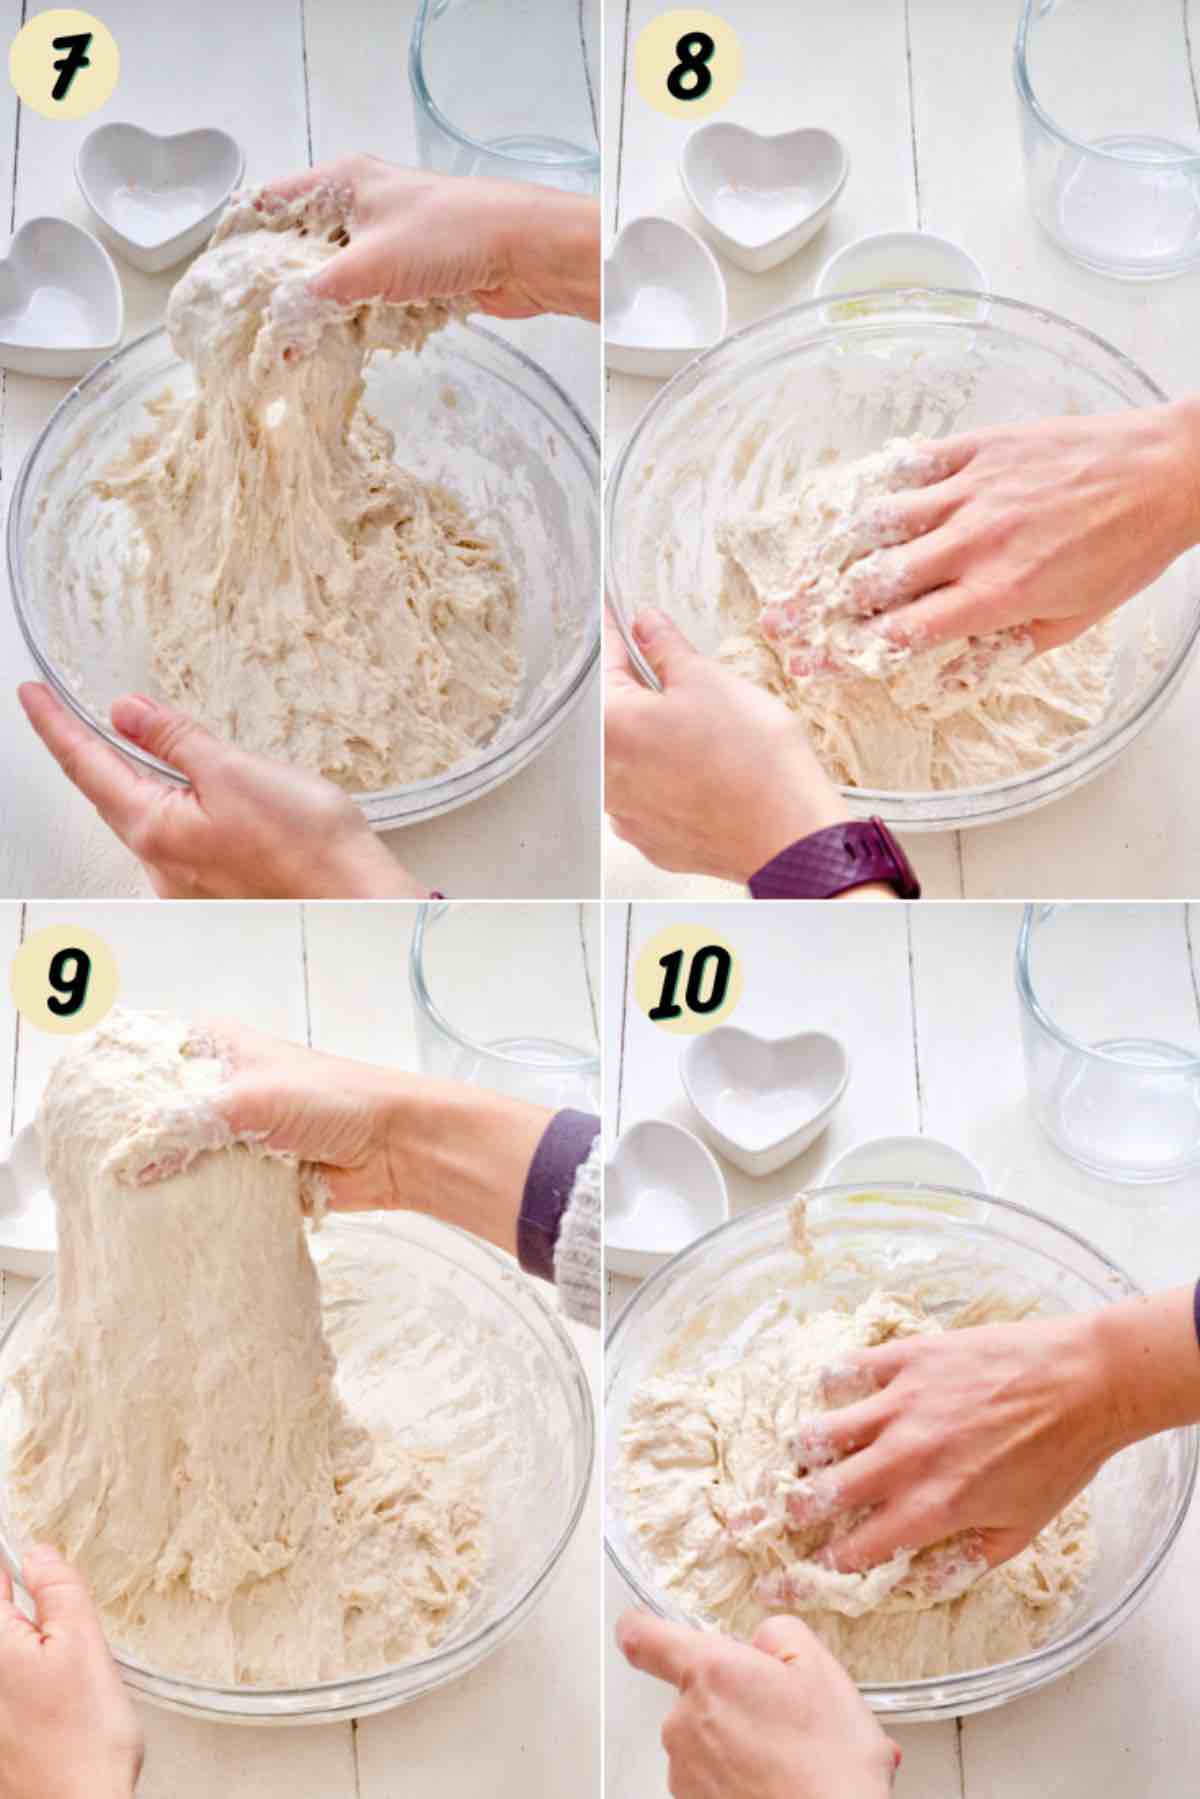 Performing series of stretches and folds on bread dough.